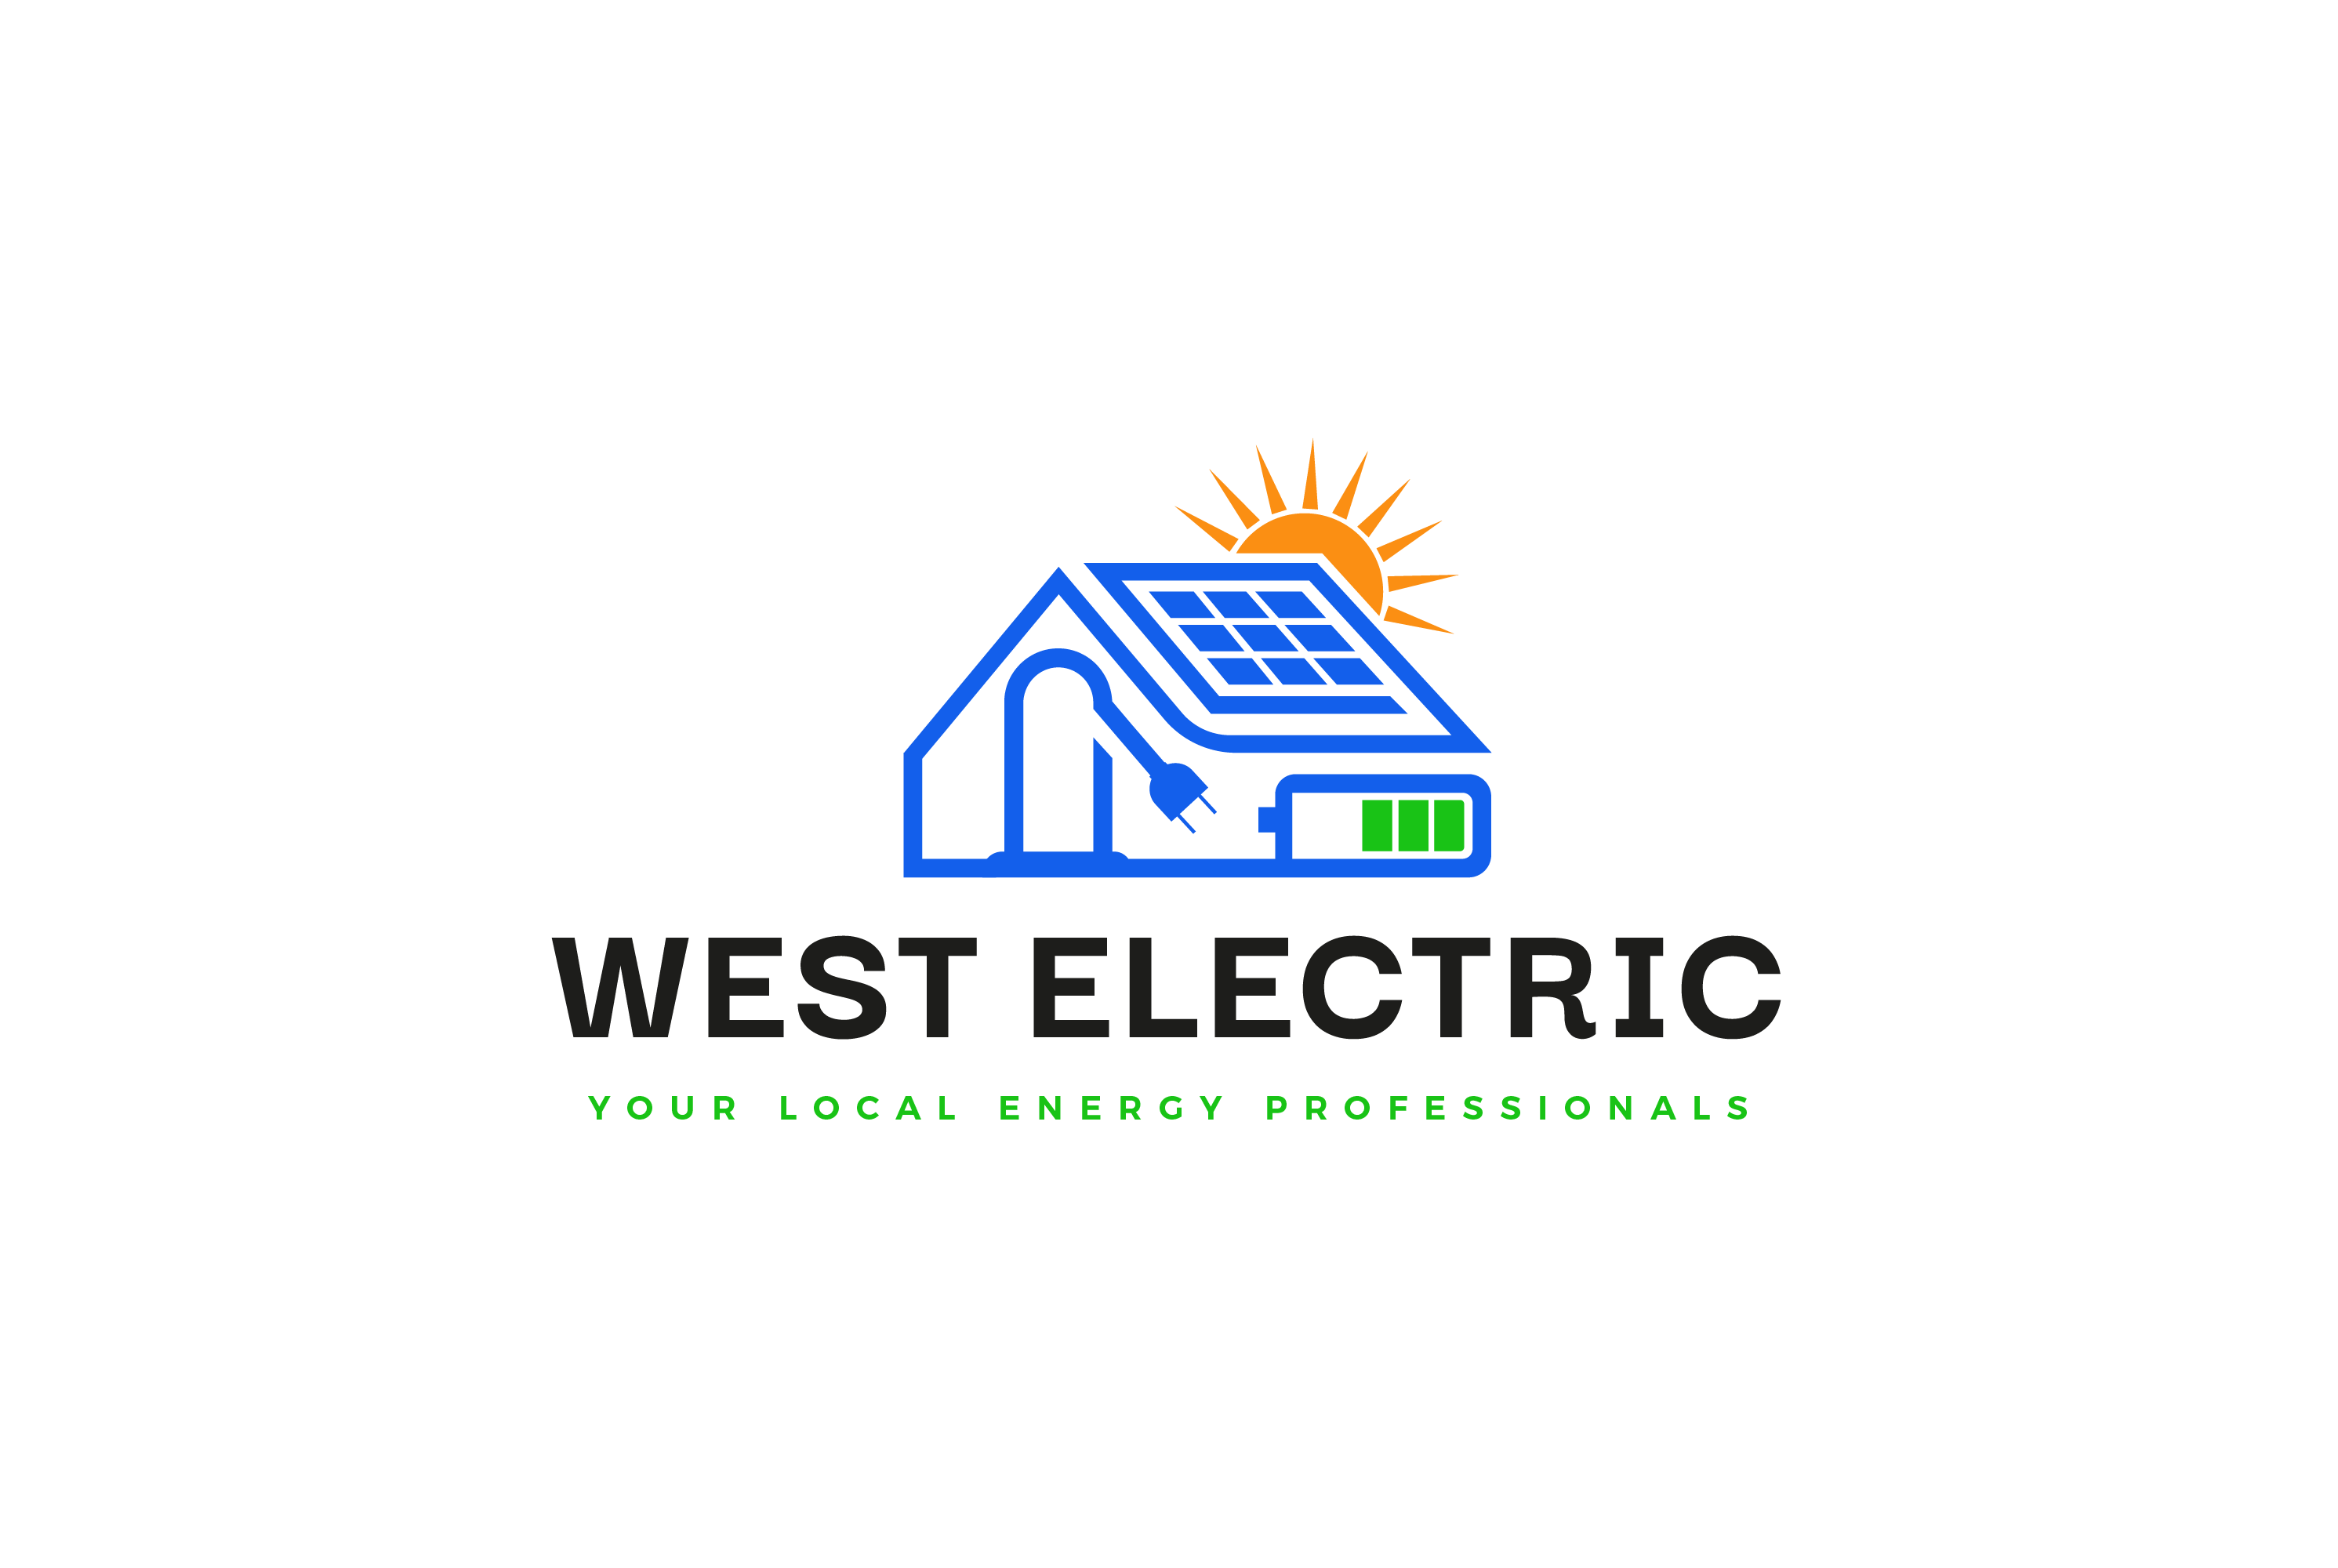 West Electric Energy